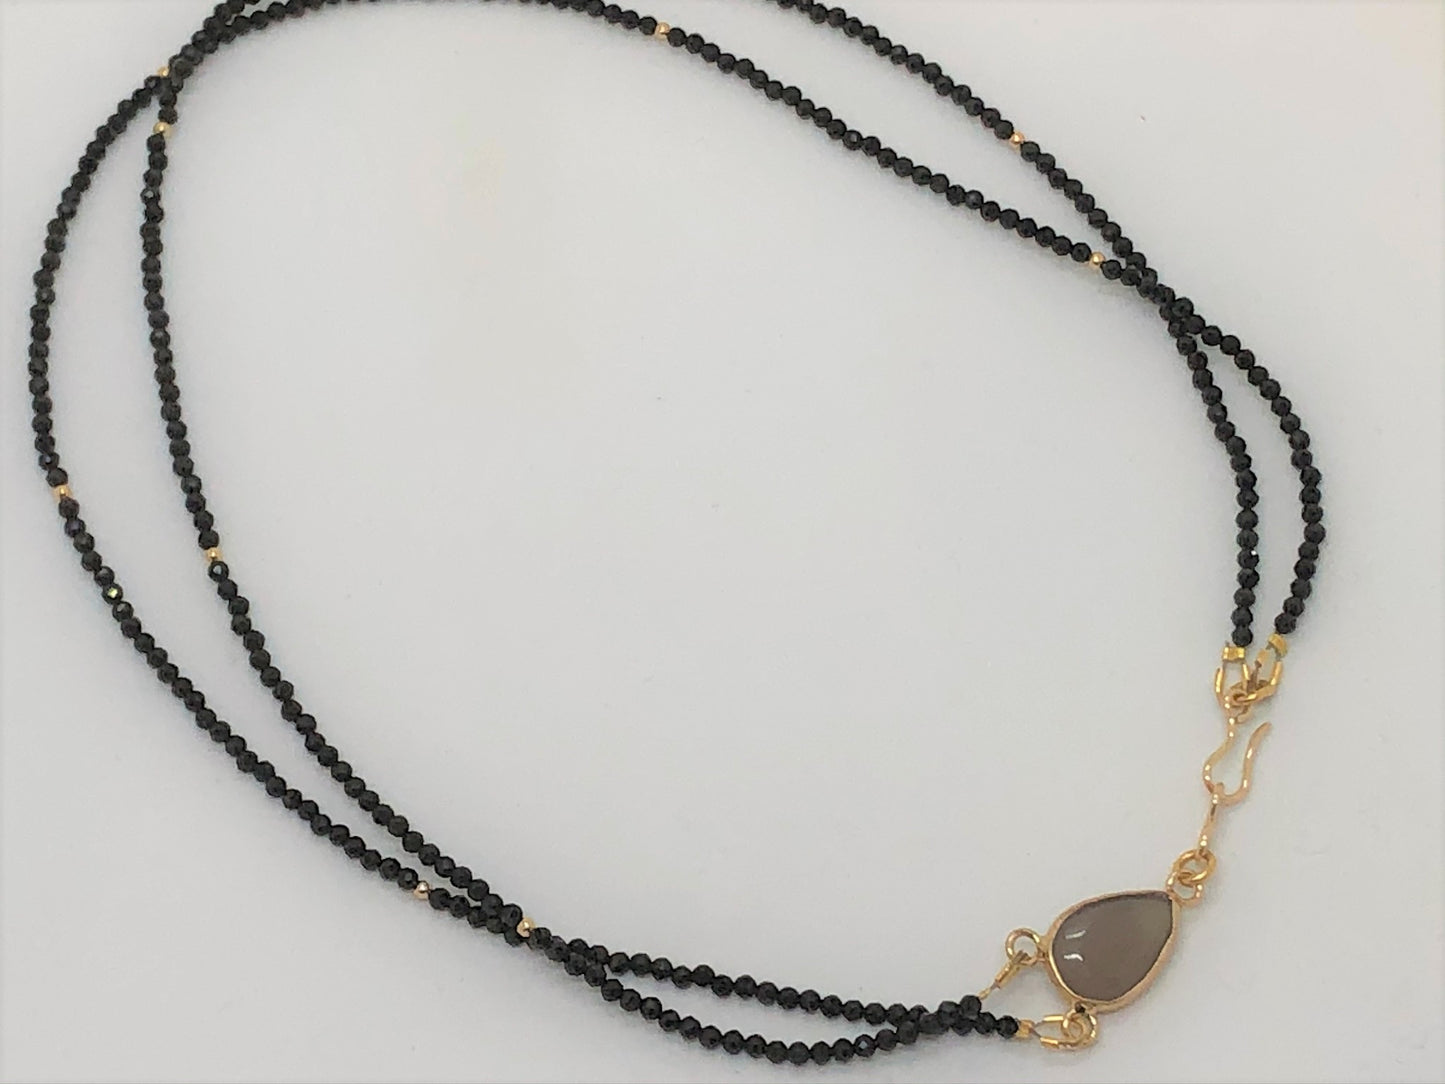 Teardrop Double Mini Faceted Black Onyx Necklace - Emmis Jewelry, Necklace, [product_color]